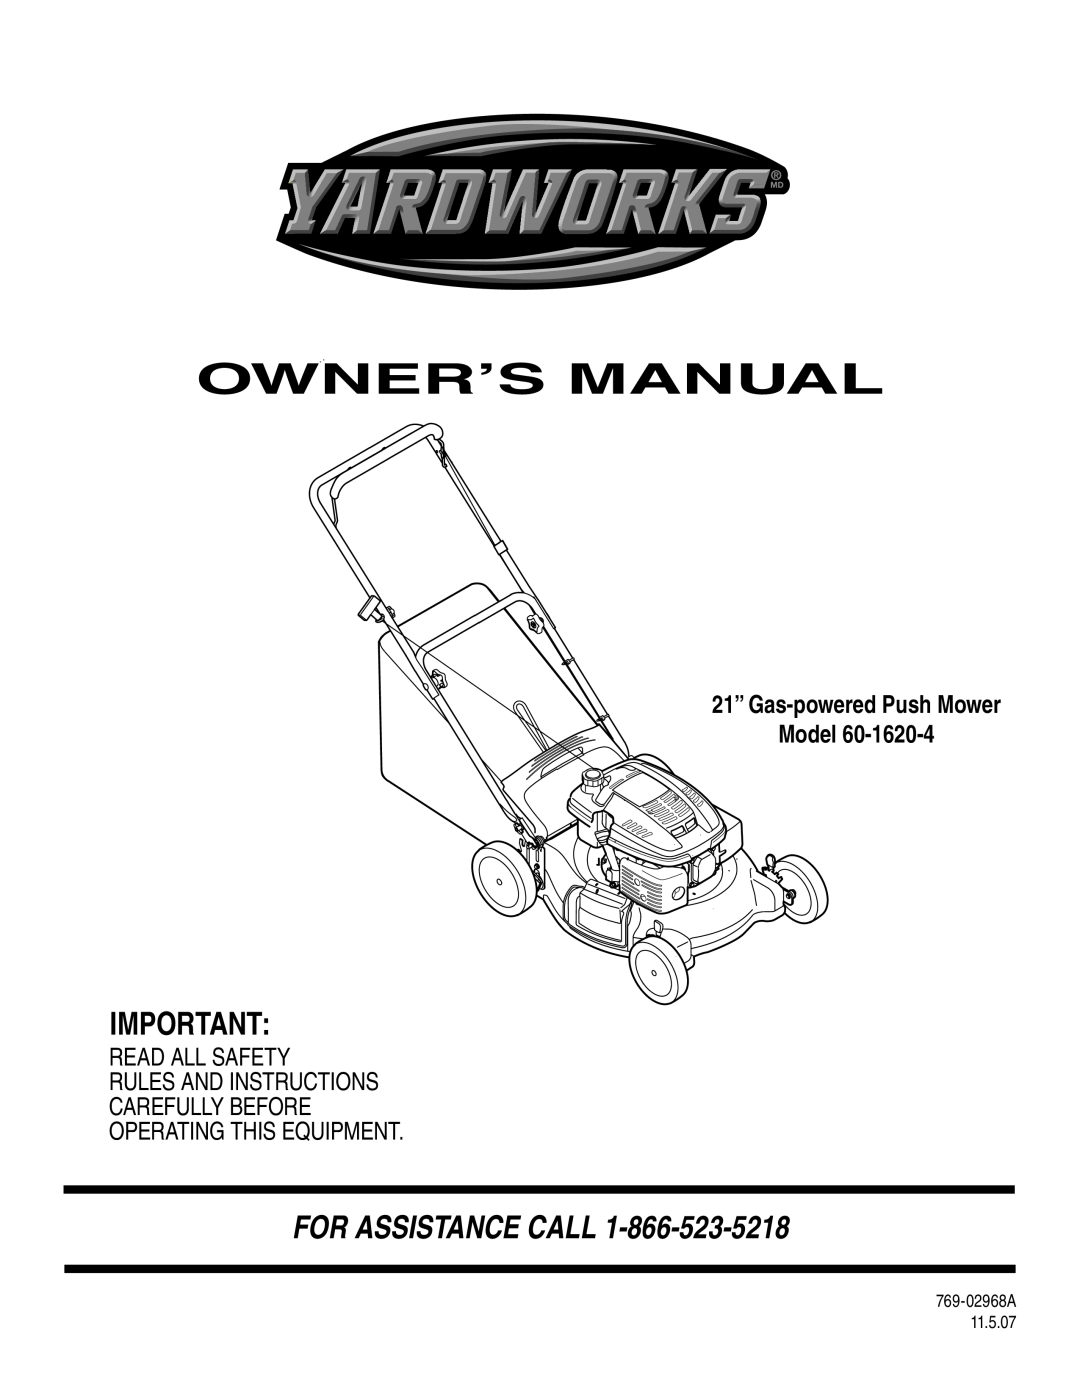 MTD 60-1620-4 owner manual For Assistance Call, 21” Gas-powered Push Mower Model, Operating This Equipment 